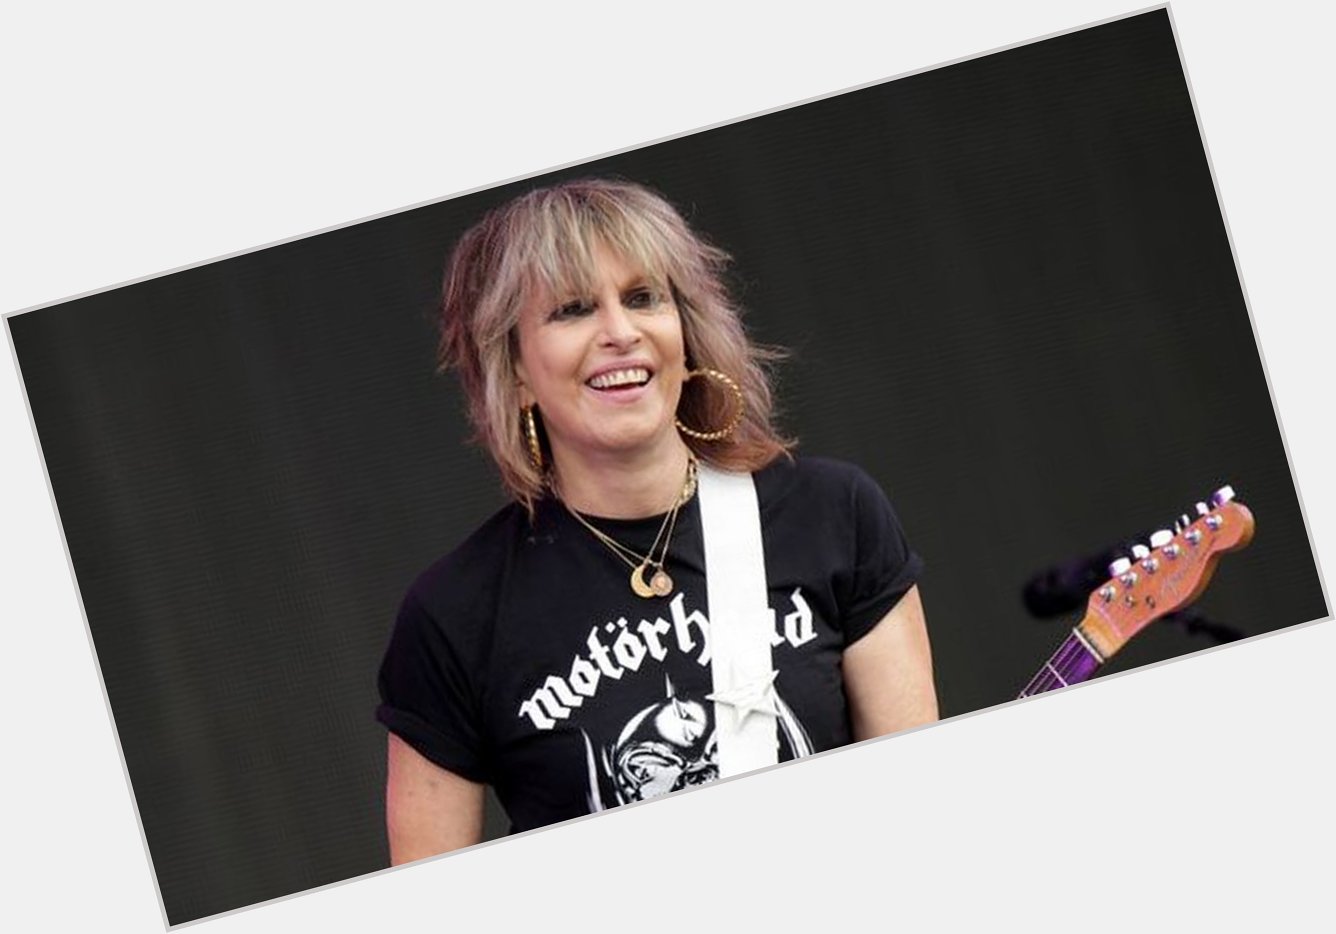 A Big BOSS Happy Birthday today to Chrissie Hynde from all of us at Boss Boss Radio! 